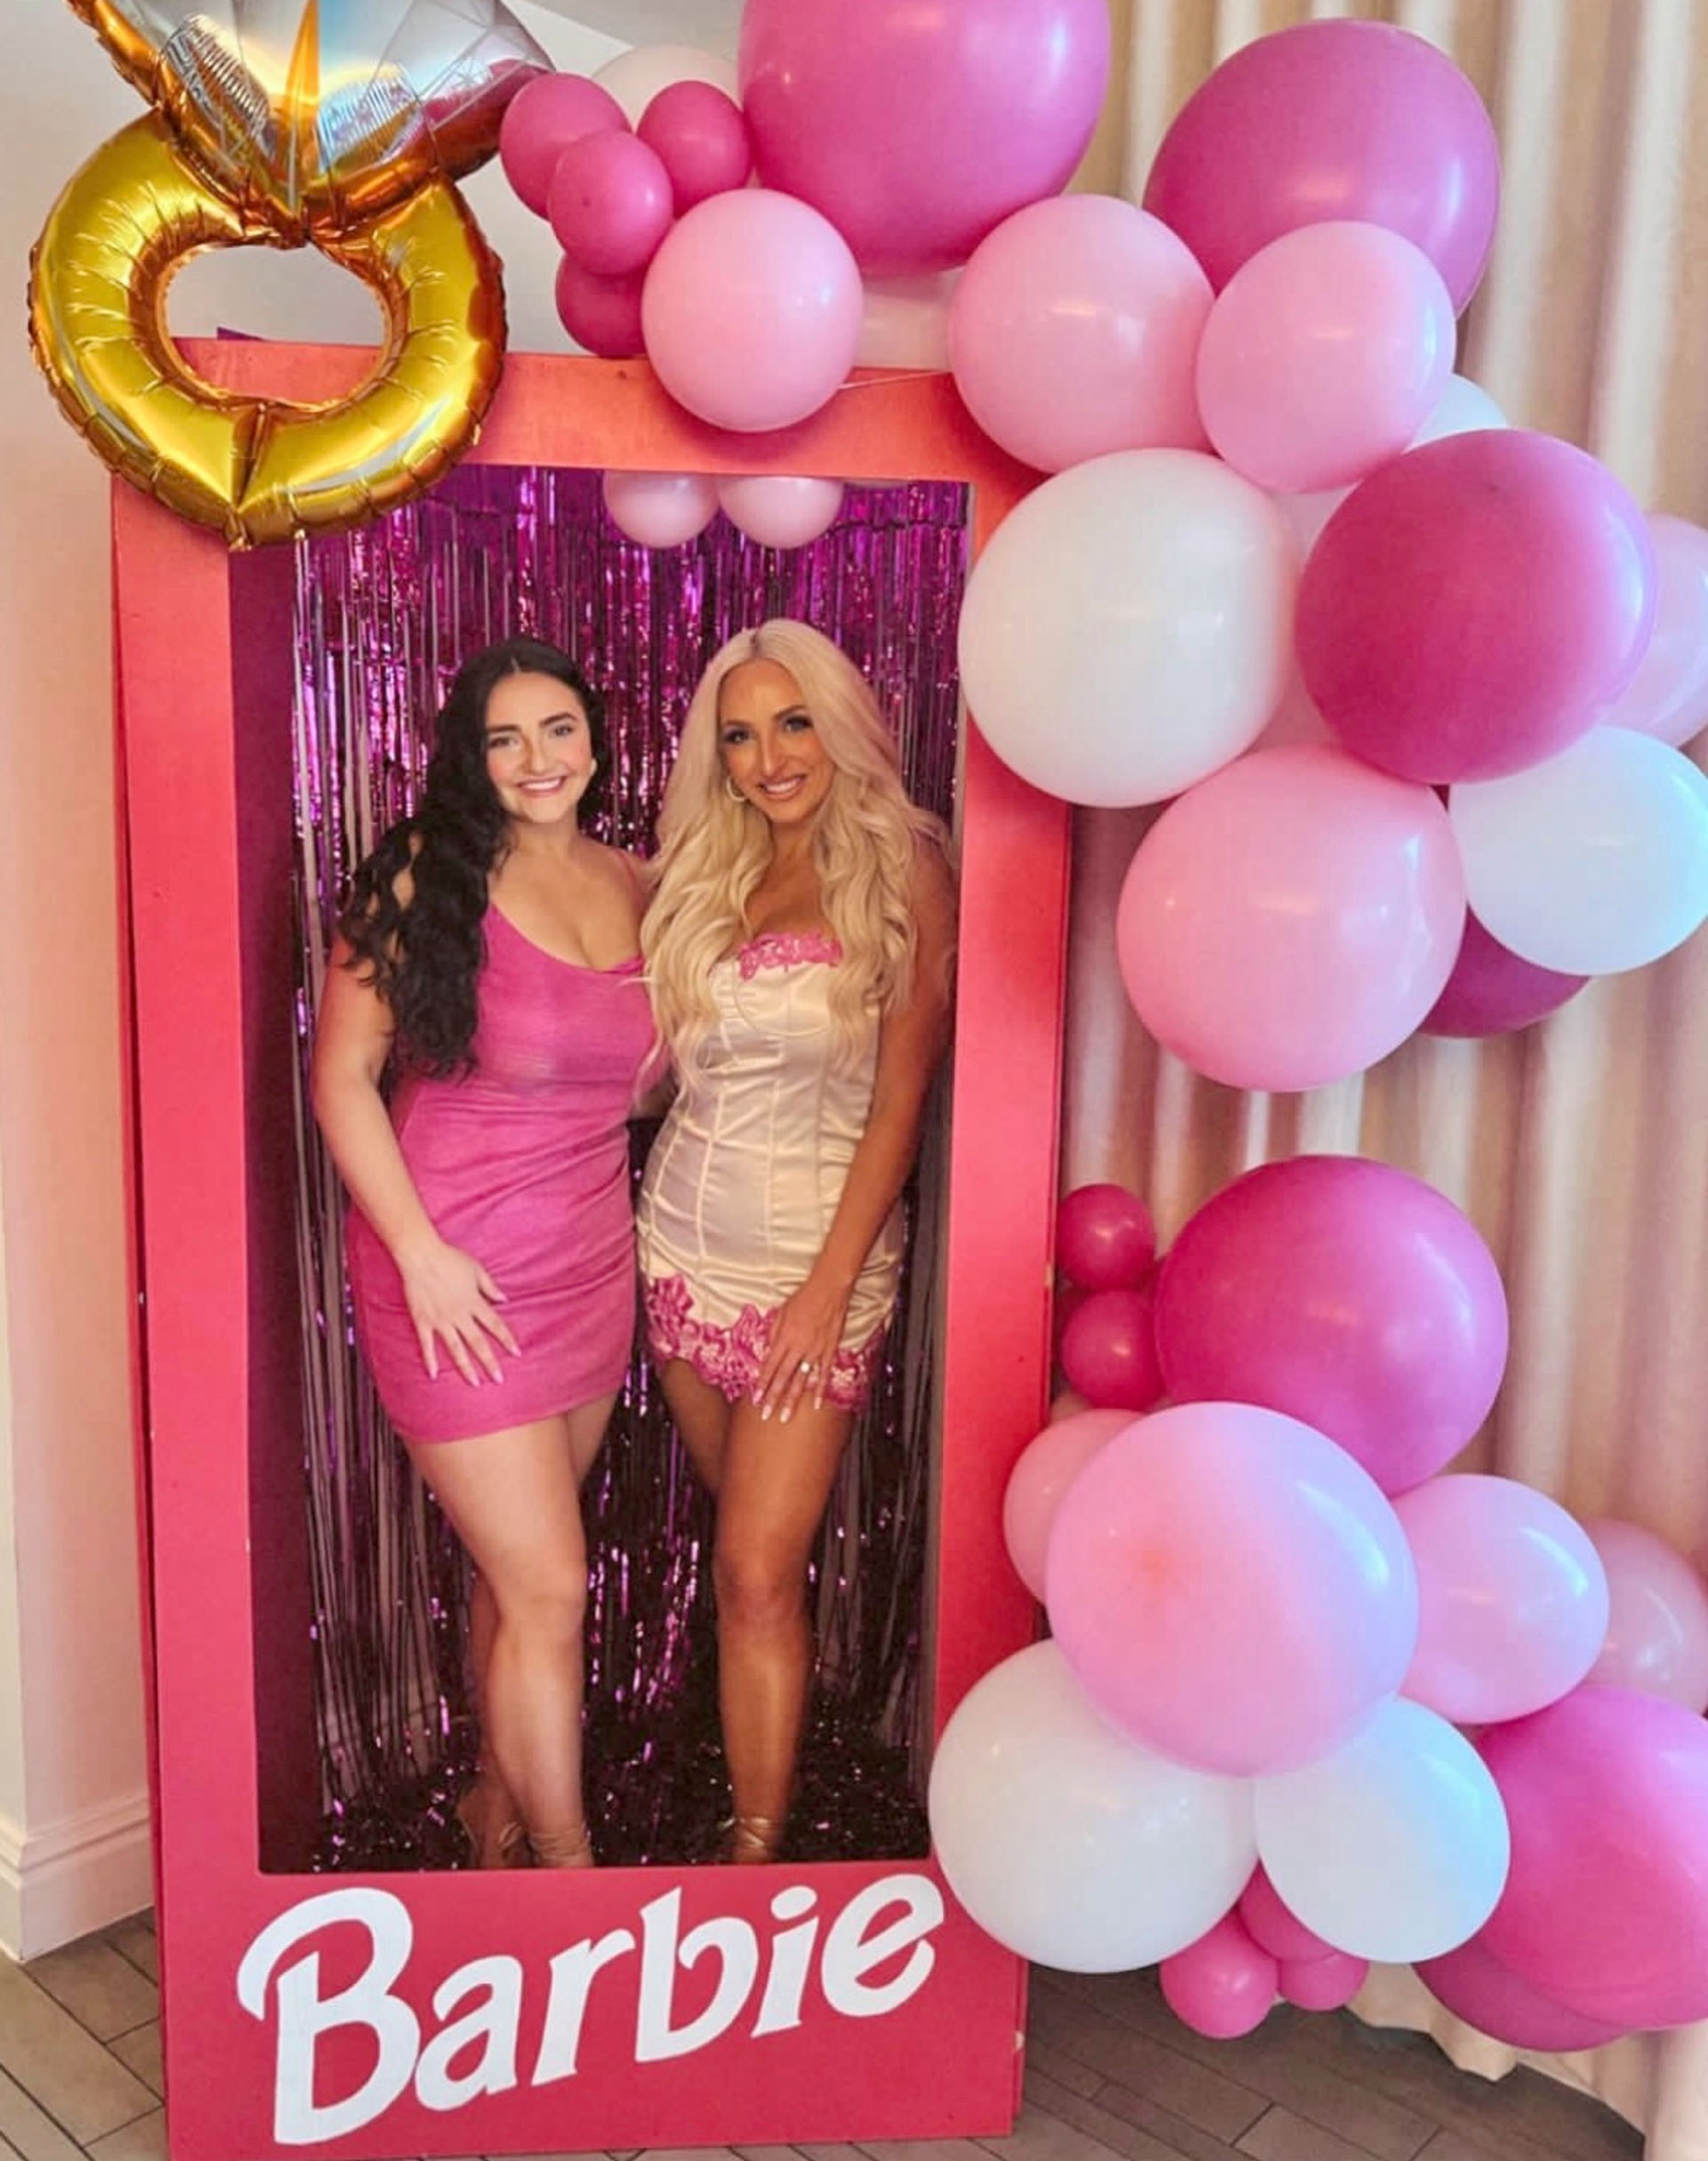 Barbie Life-Sized Decoration Setup with Iconic Box, Balloons, Tinsel,  Delivery & Setup